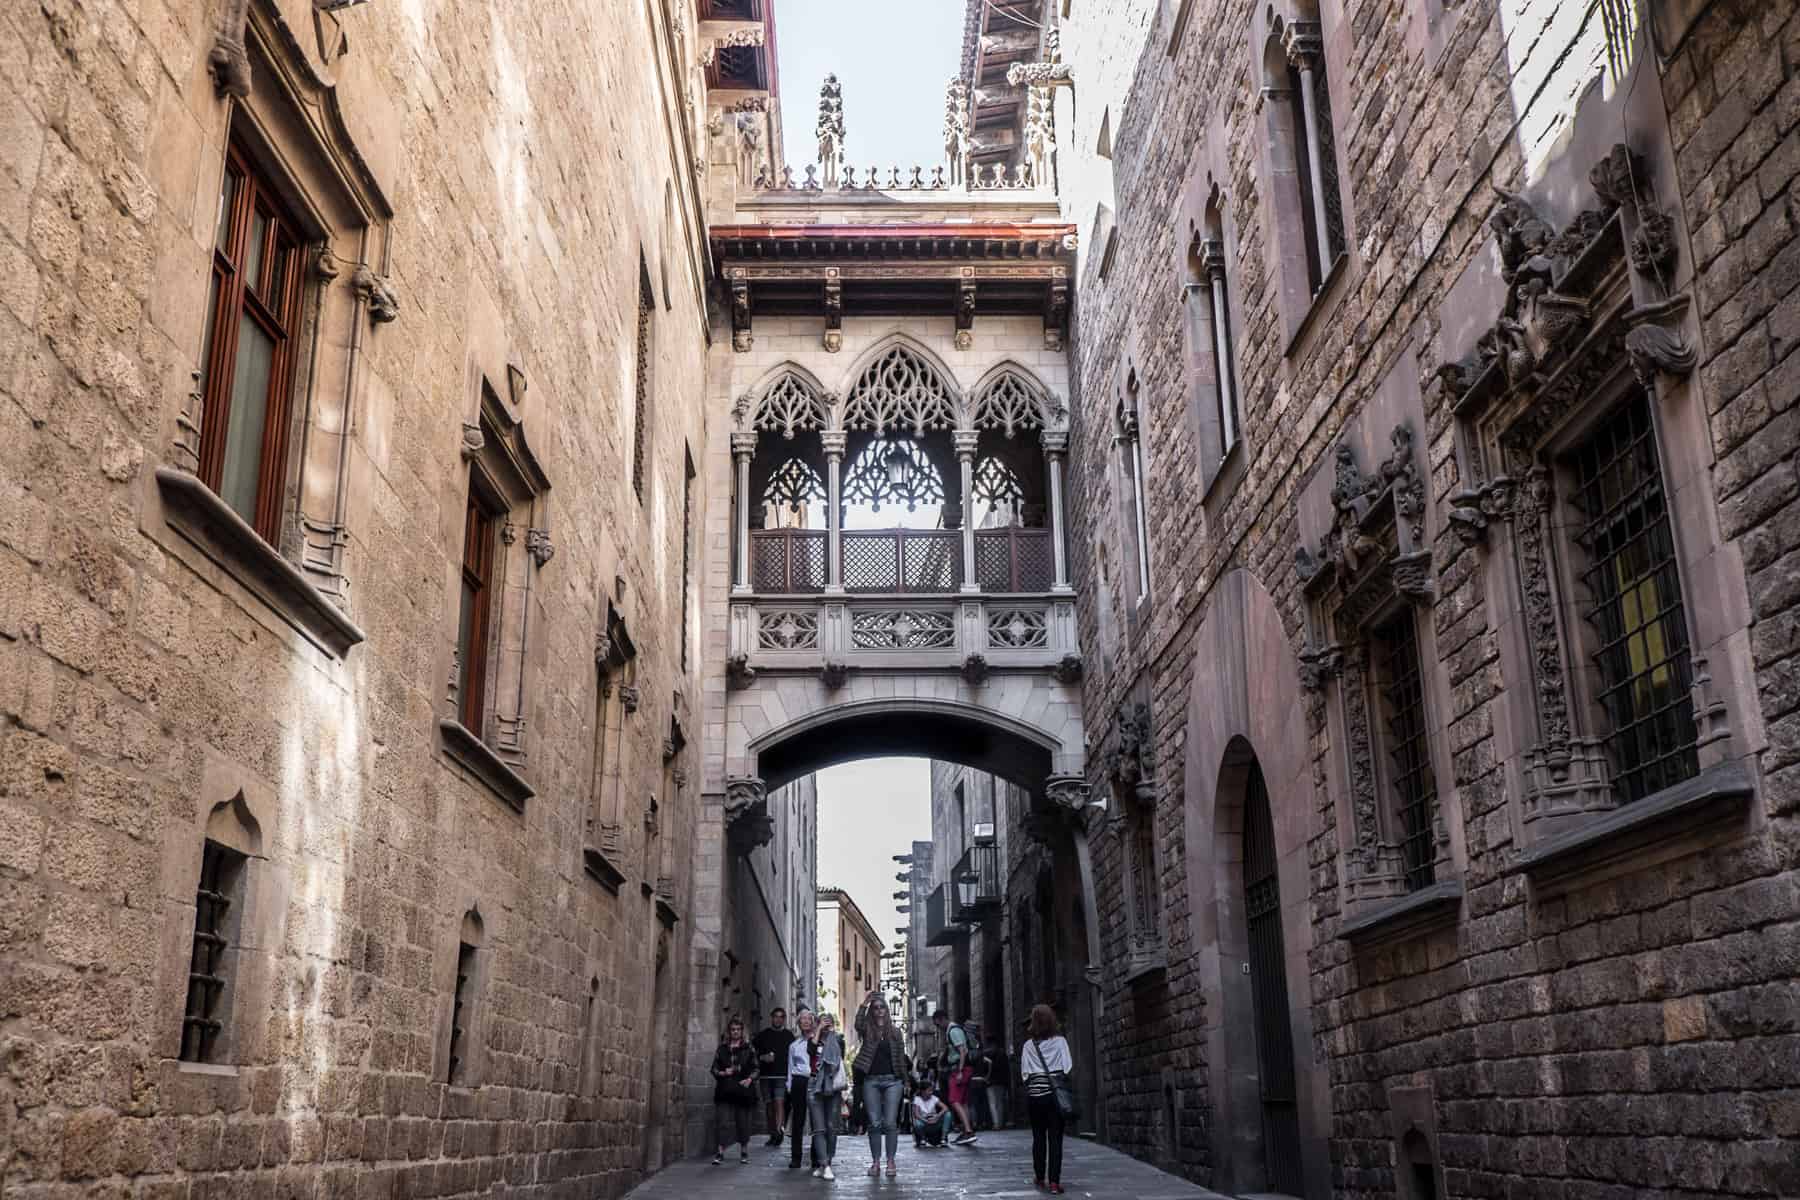 A narrow, delicately carved balcony connects two old golden and brown stone buildings on a long street in Barcelona. People are walking underneath the structure. . 